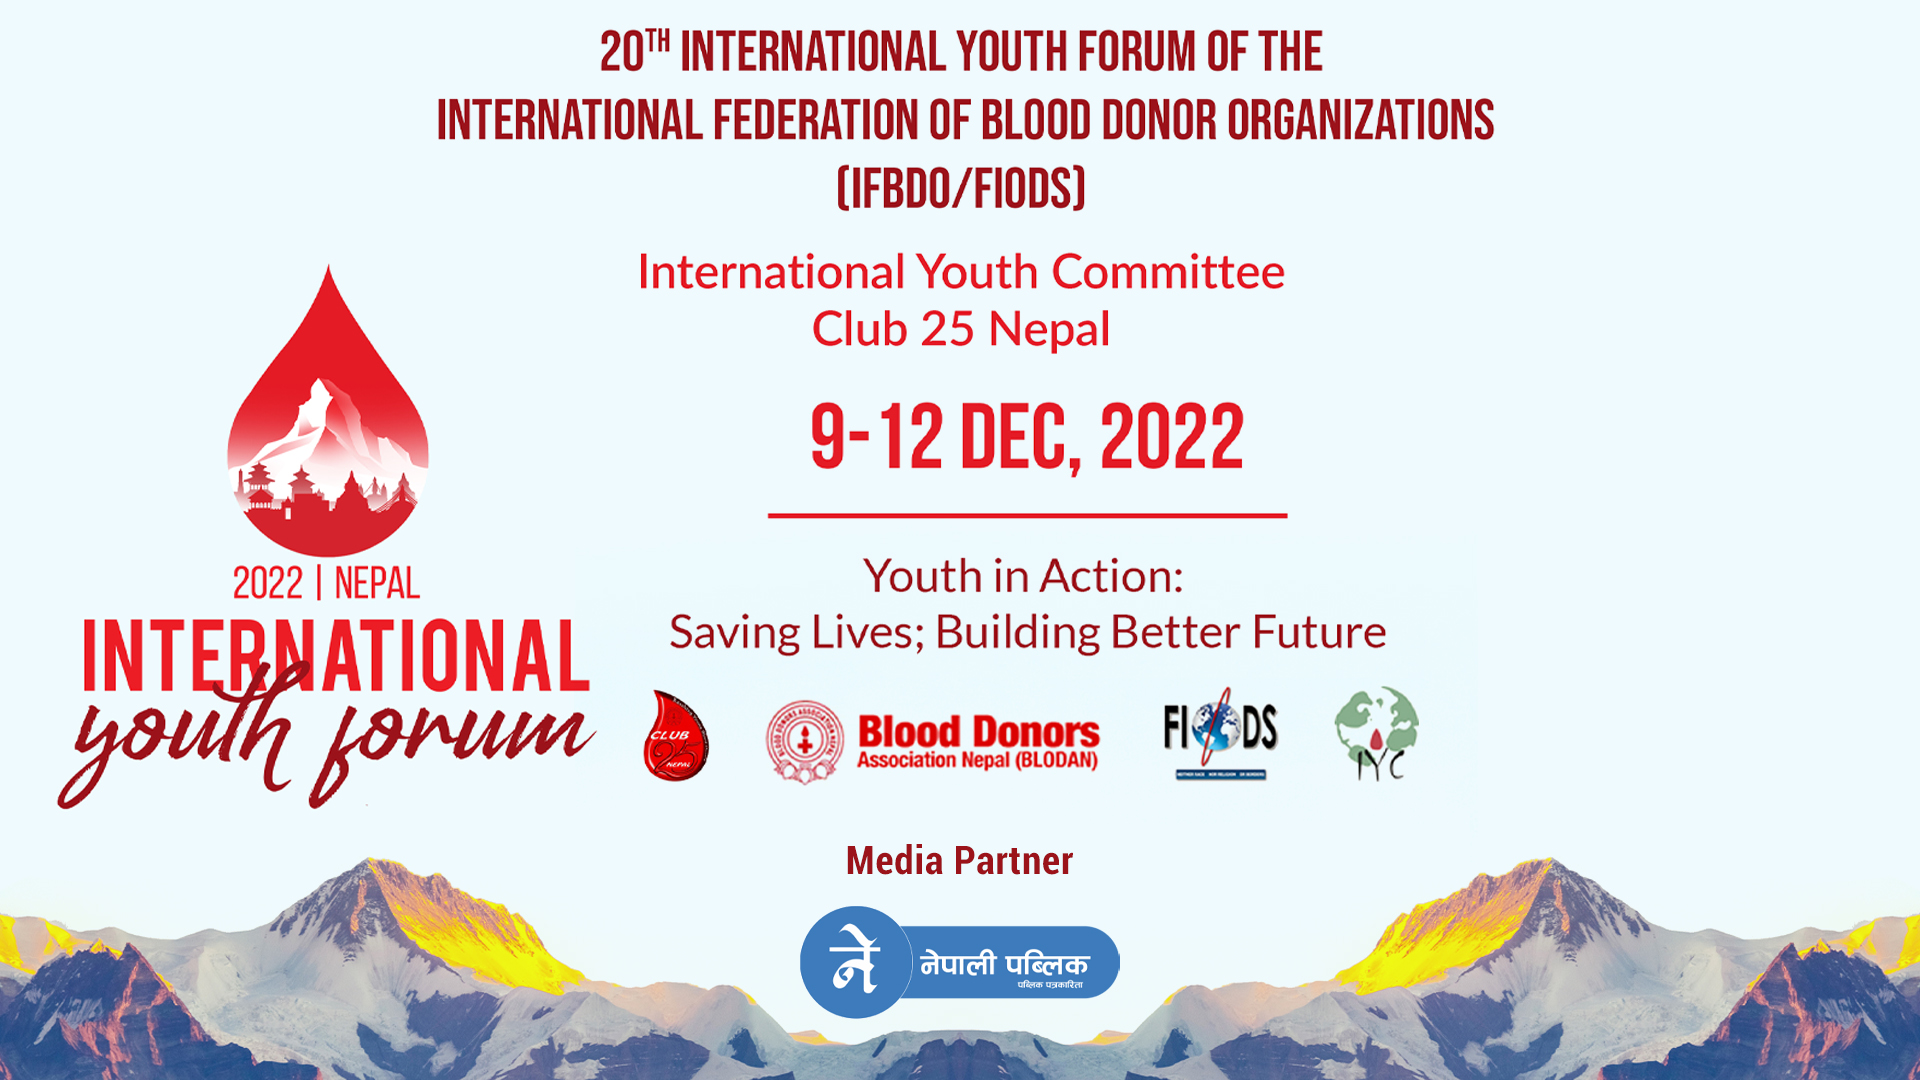 International youth committee